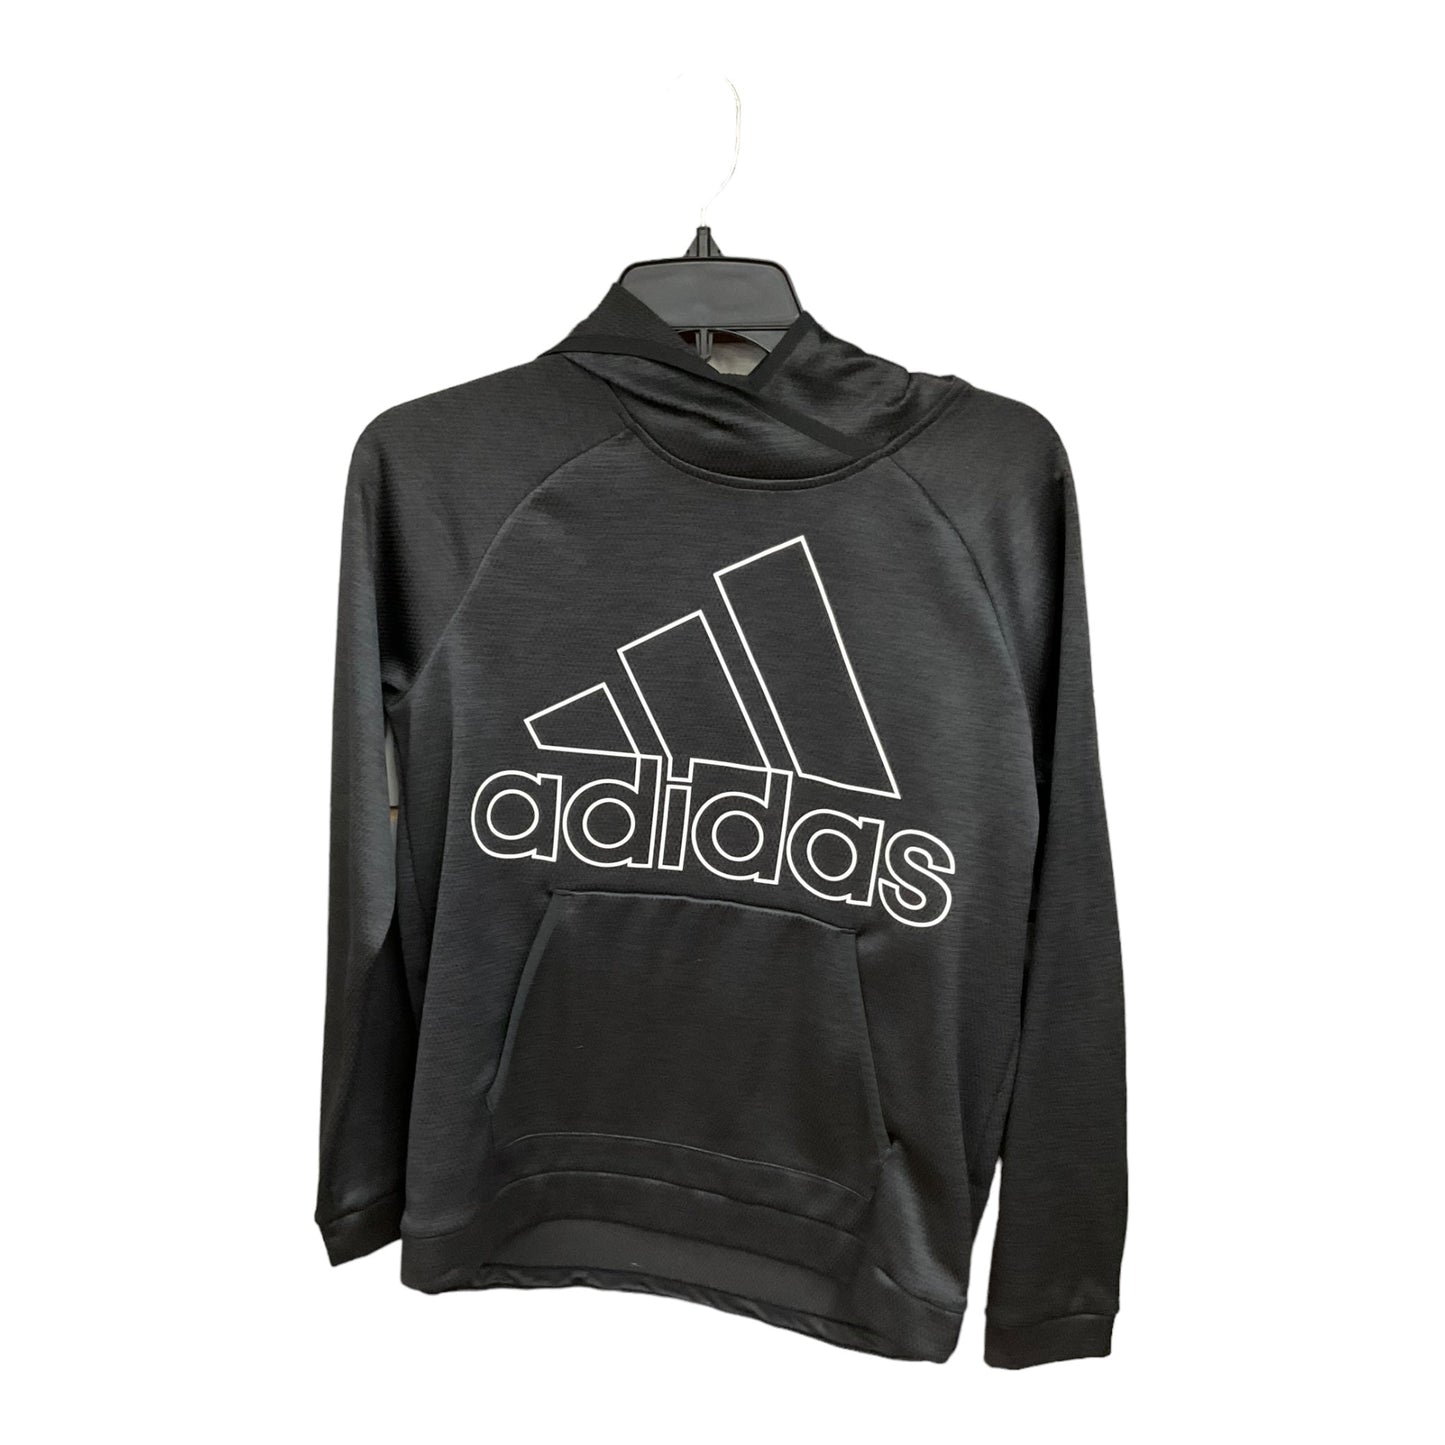 Grey Athletic Top Long Sleeve Collar Adidas, Size S